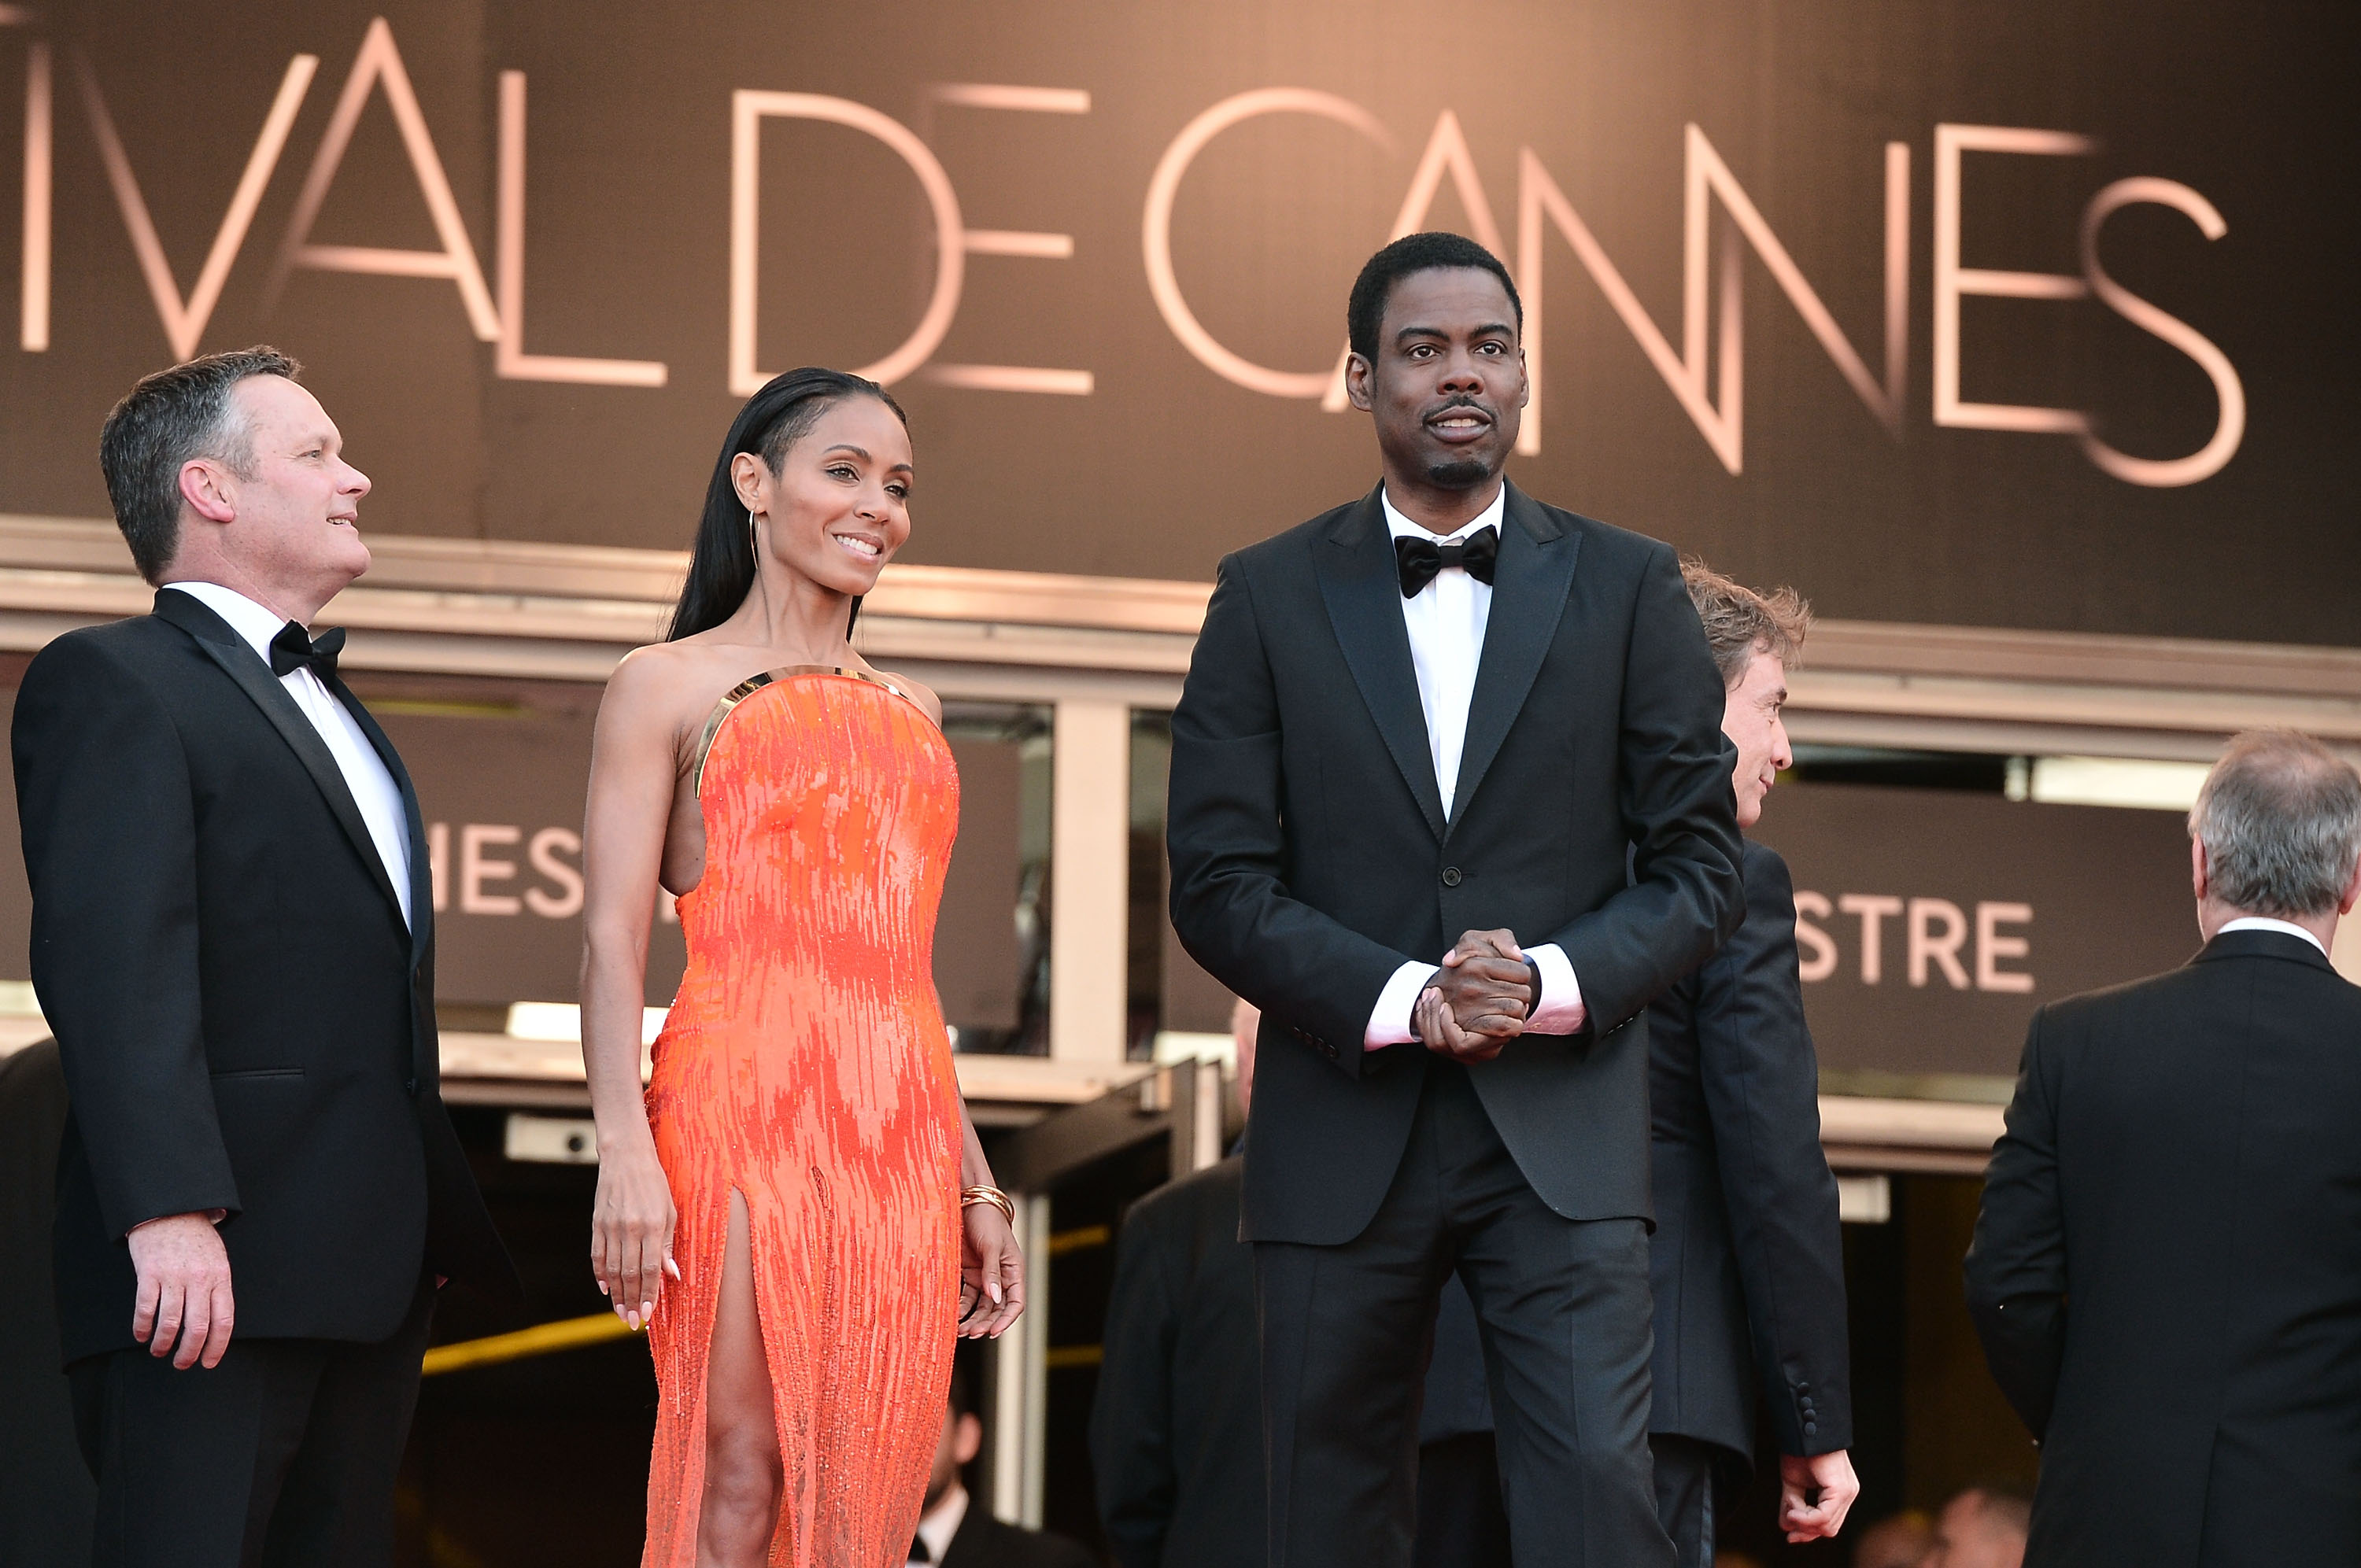 Chris Rock & Jada Pinkett Smith: Insiders Say Comedian Has Been “Obsessed” With Actress For Nearly 30 Years